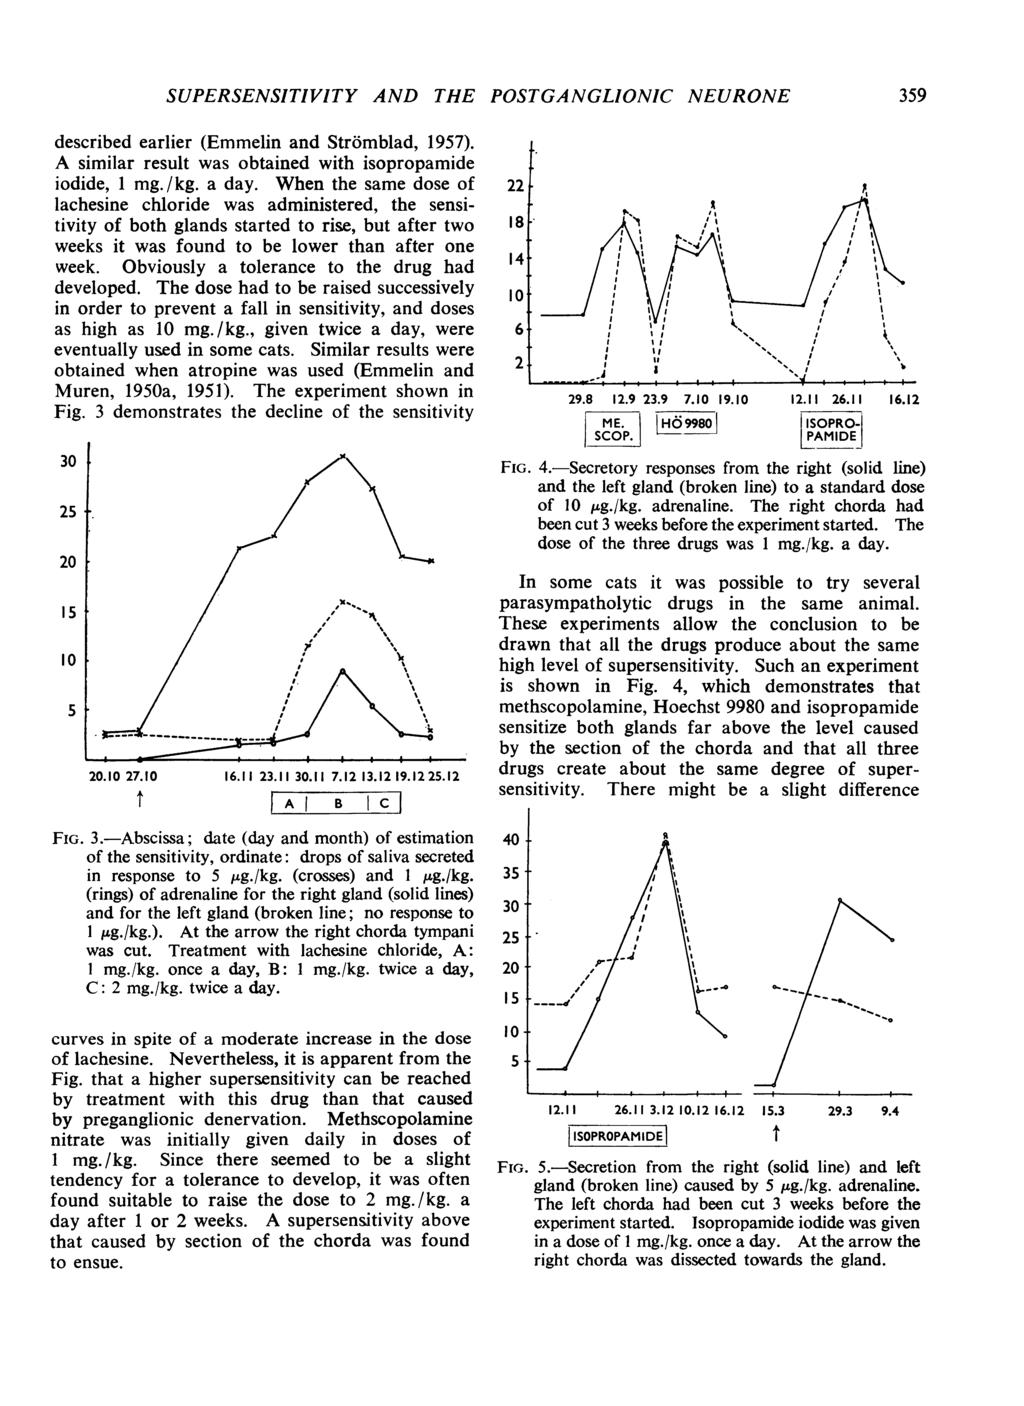 SUPERSENSITIVITY AND THE POSTGANGLIONIC NEURONE 359 described earlier (Emmelin and Str6mblad, 1957). A similar result was obtained with isopropamide iodide, 1 mg./kg. a day.